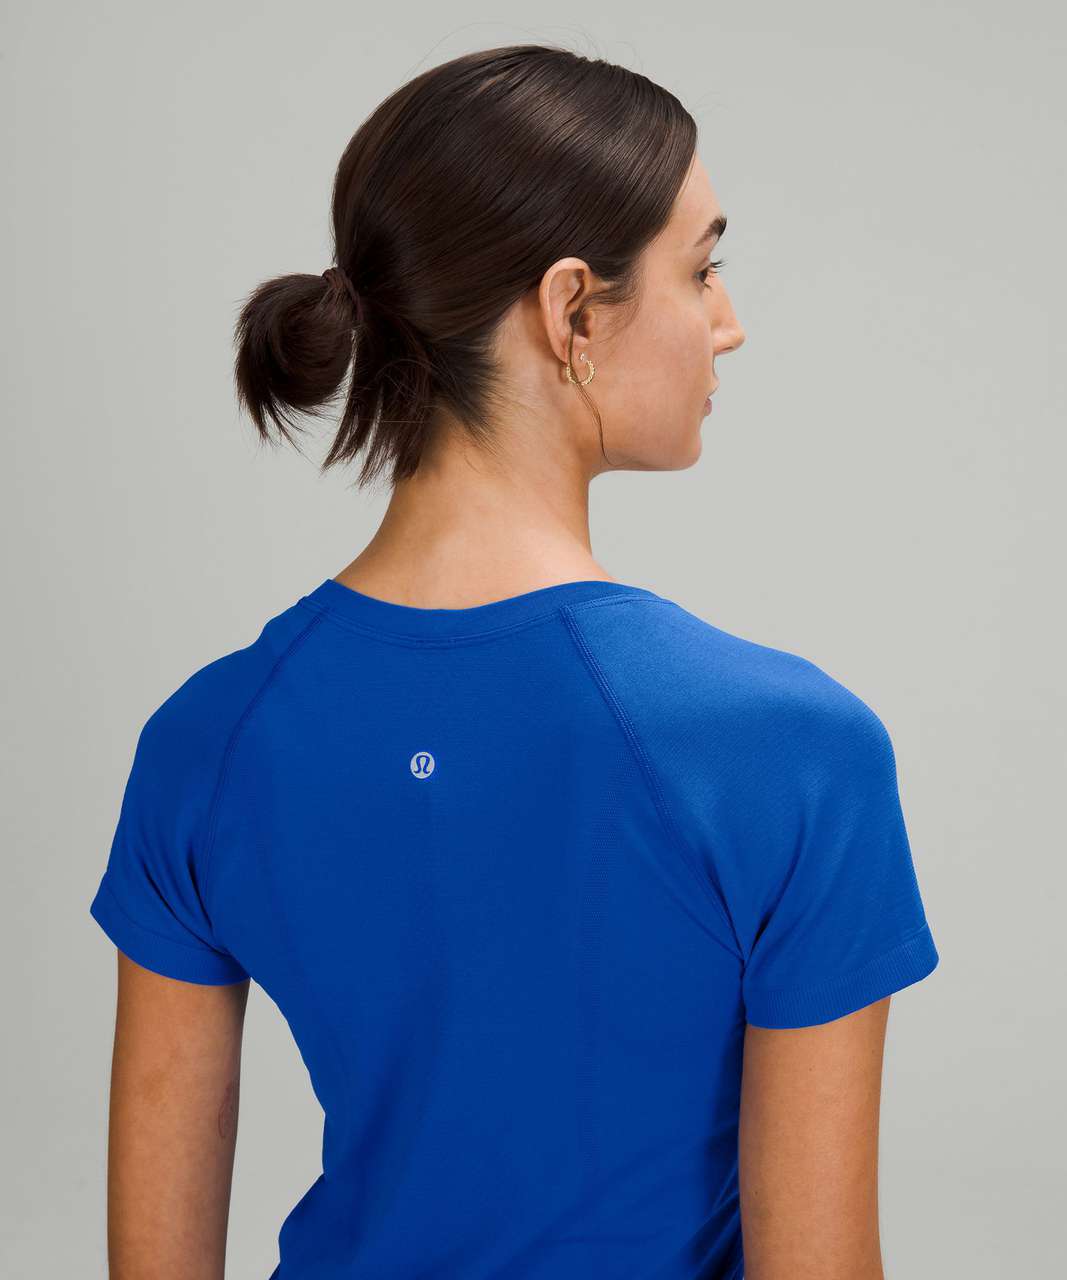 Lululemon Swiftly Tech Short Sleeve Shirt Blue Size 6 - $45 (33% Off  Retail) - From Paige